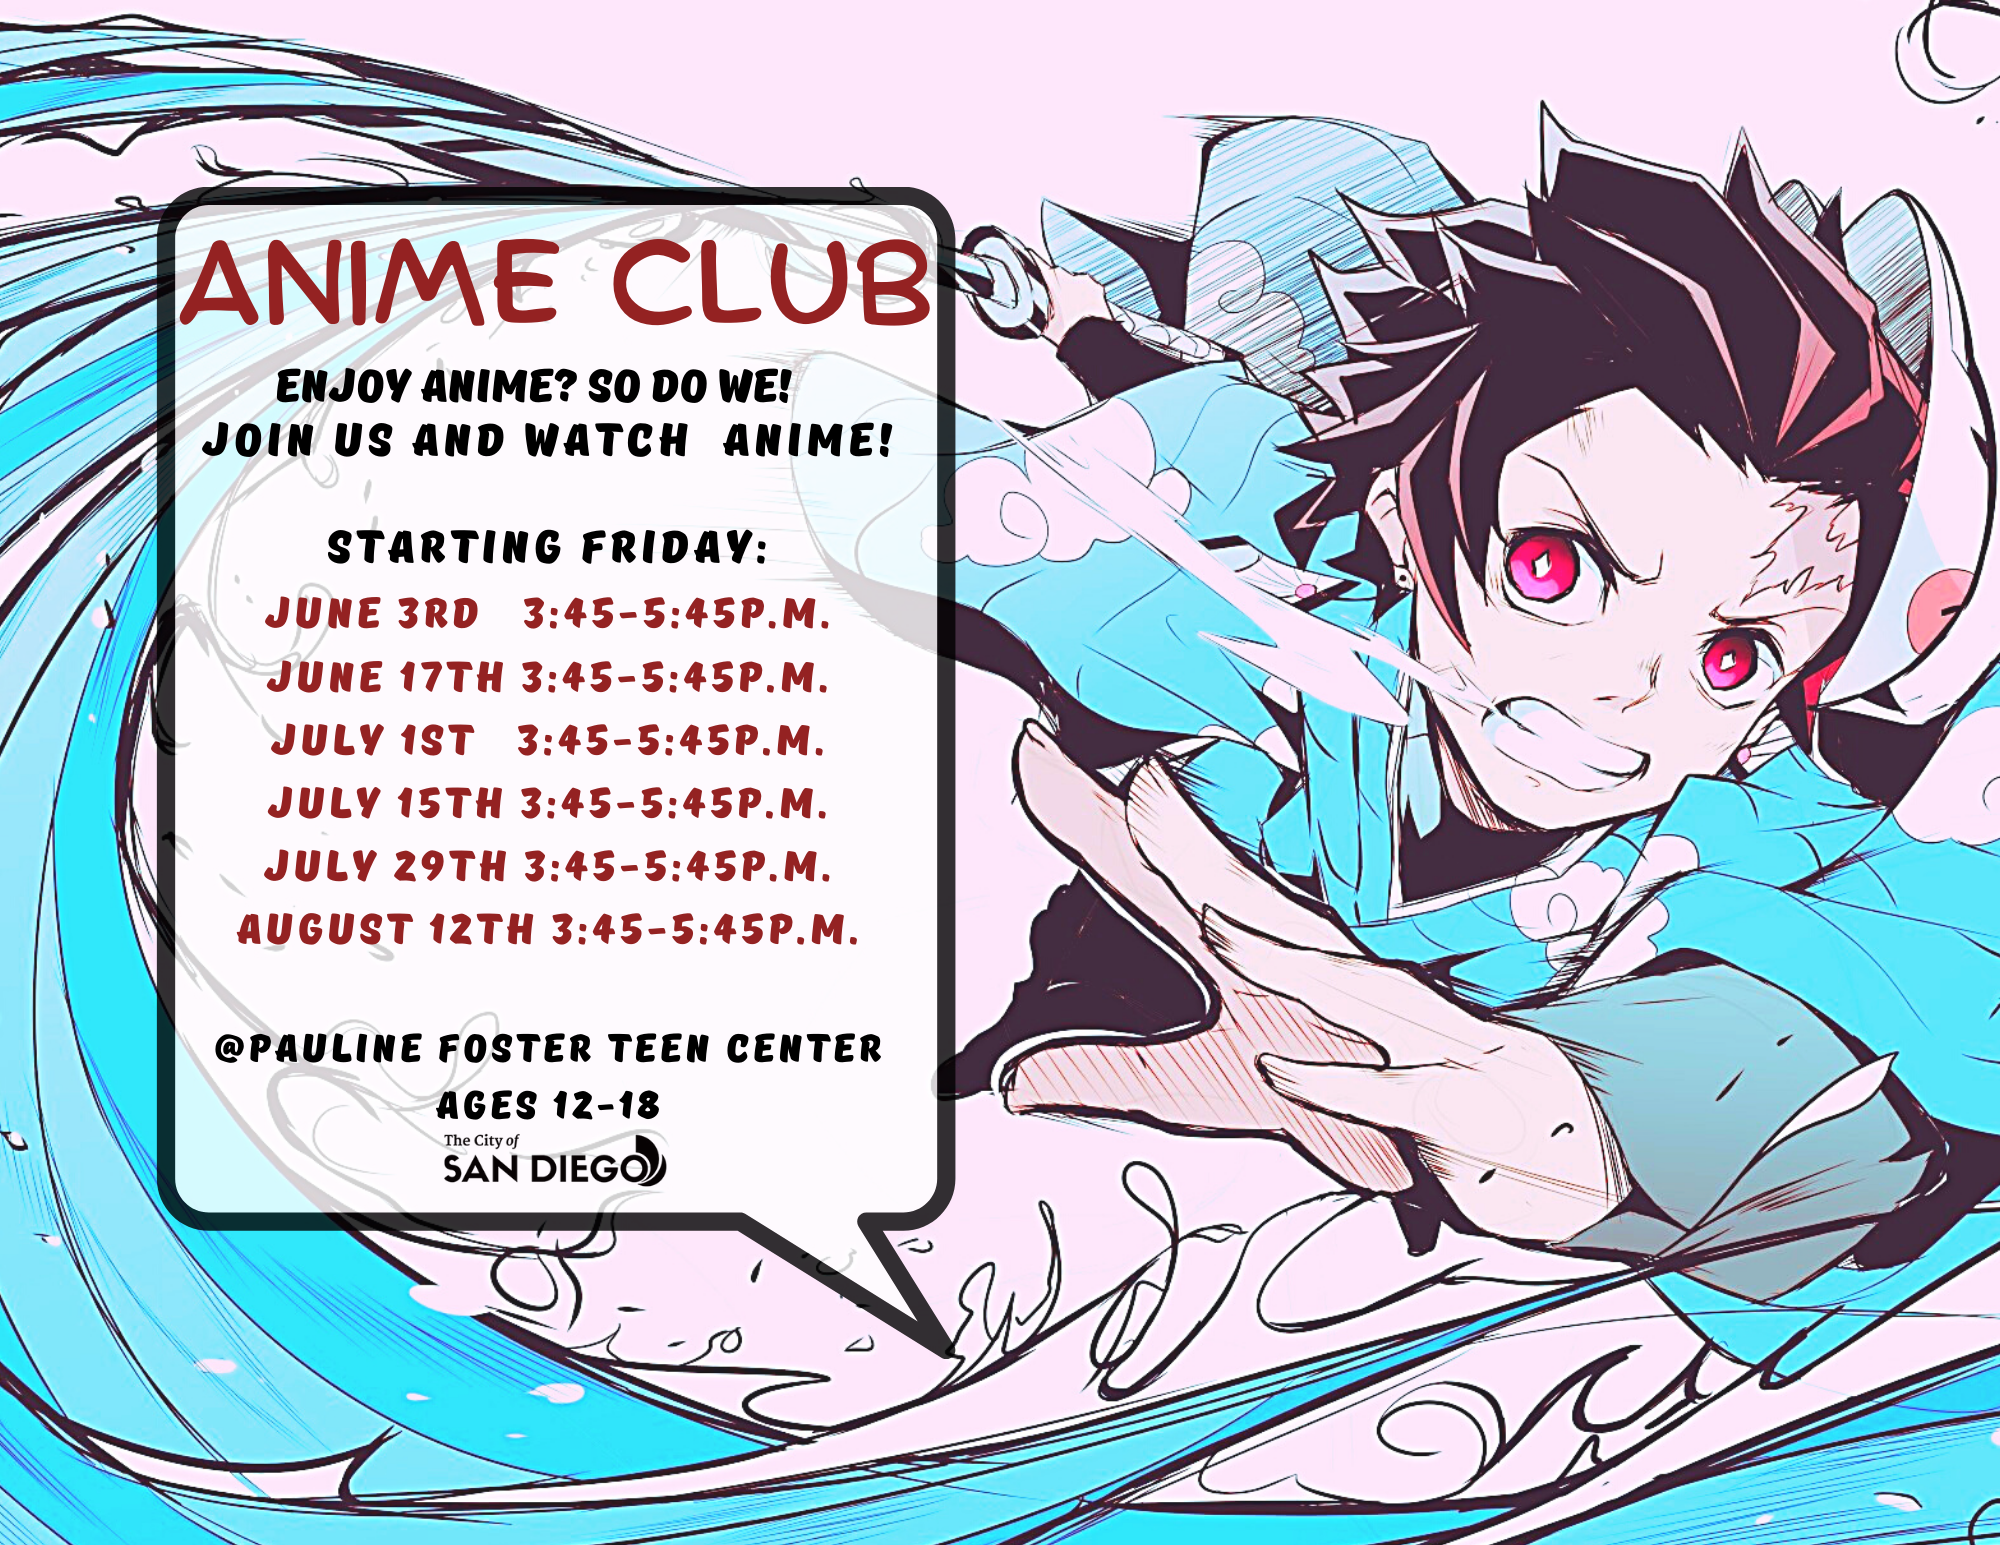 Teen Anime Club | Normal Public Library